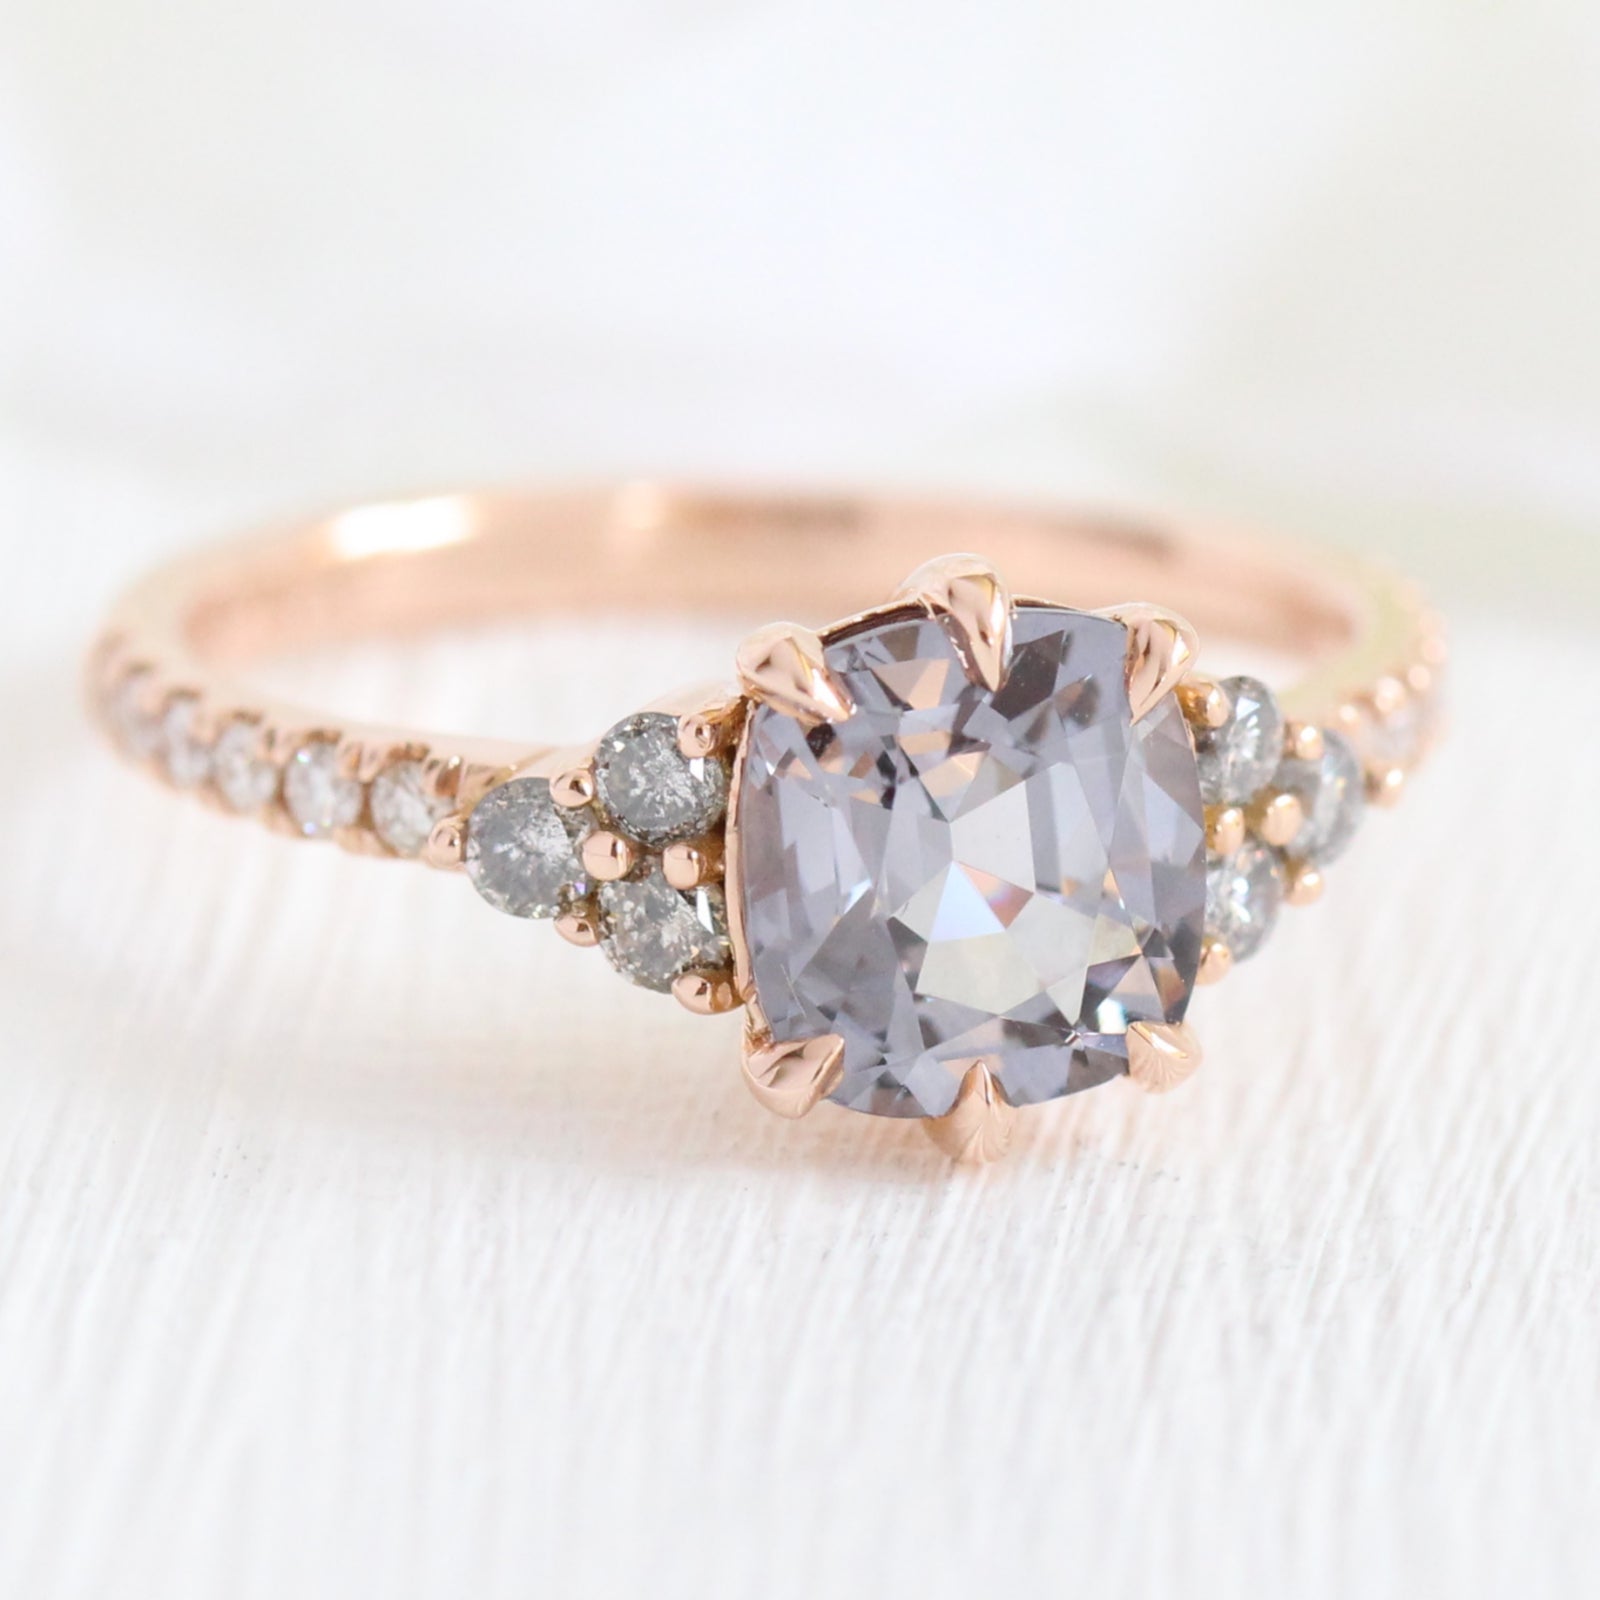 Grey Spinel Diamond Engagement Ring in Rose Gold 3 Three Stone Ring by La More Design Jewelry